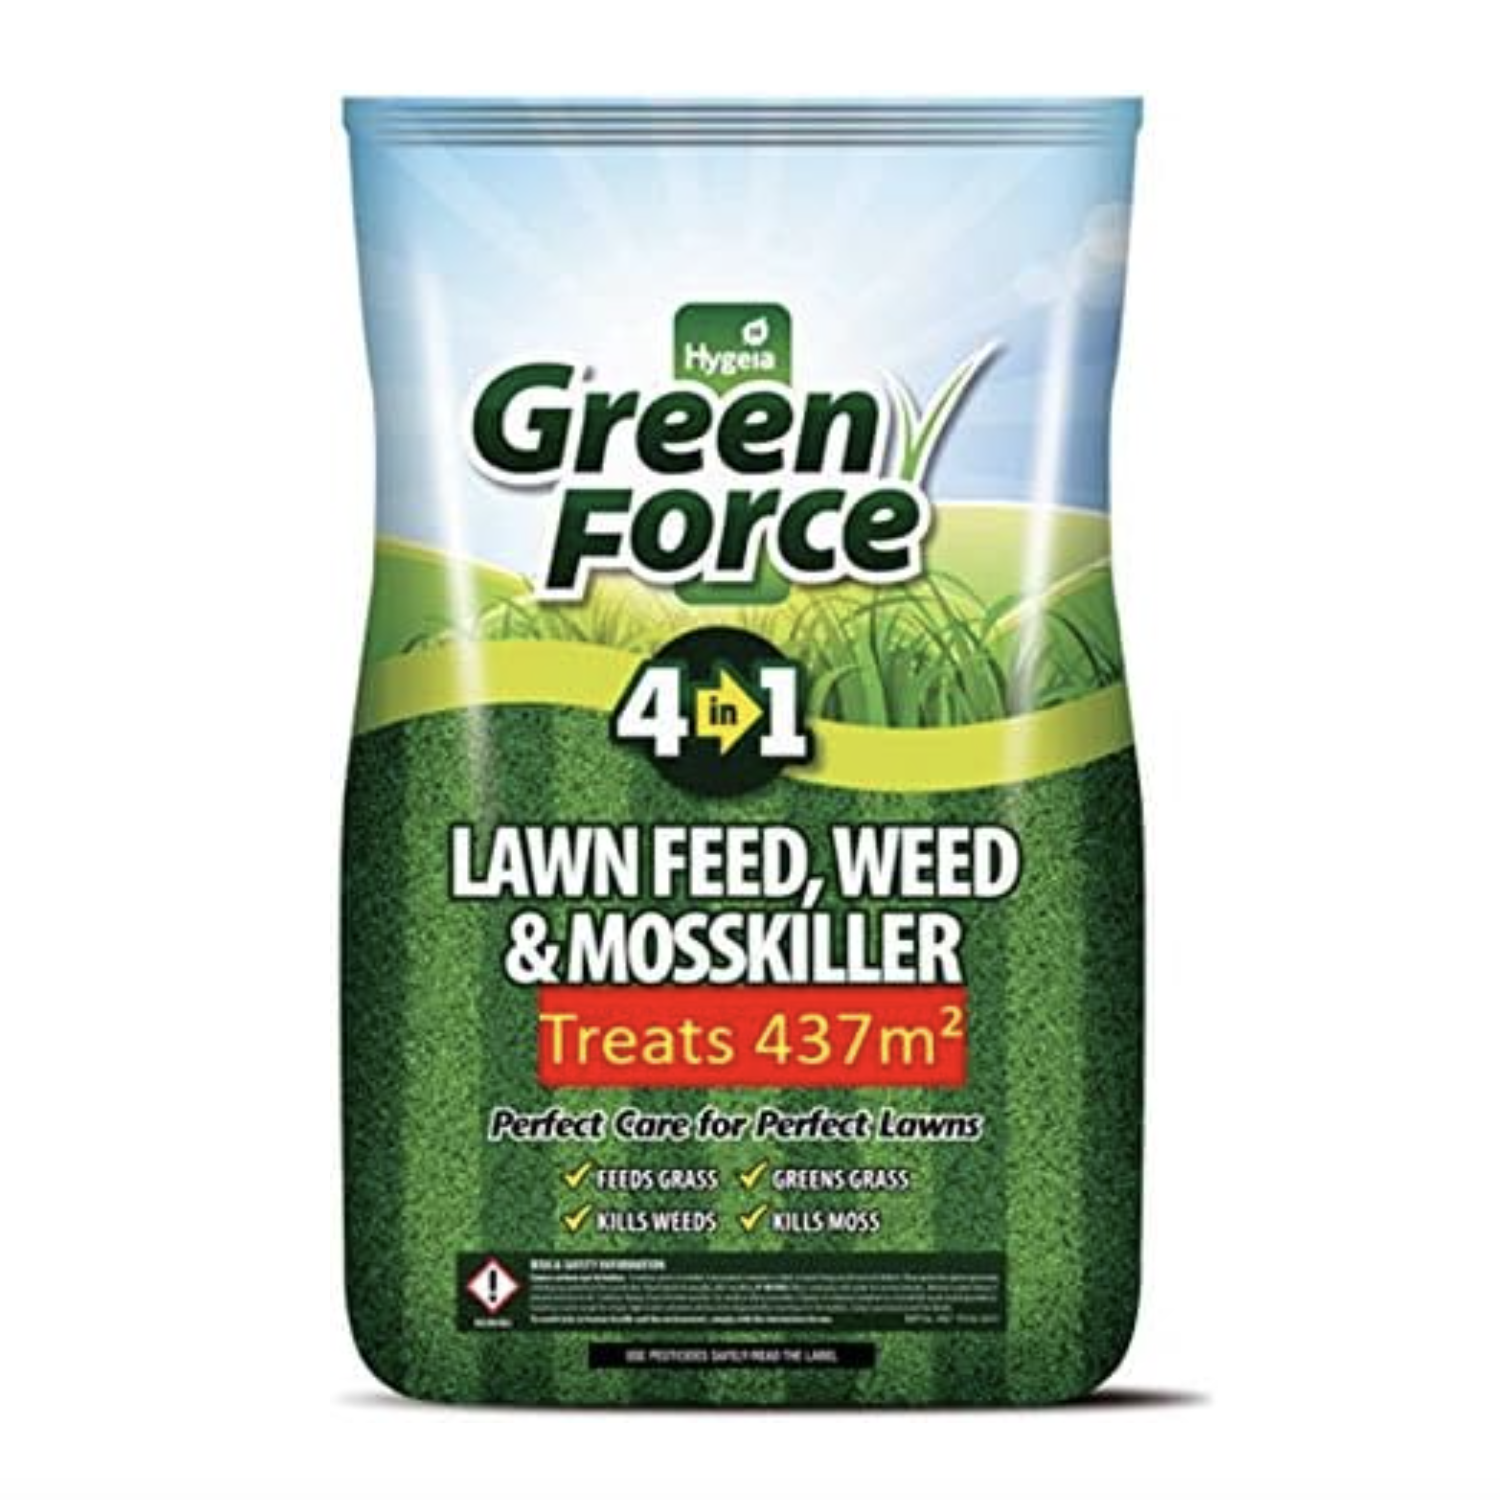 Green Force 4in1 Lawn Feed Weed & Moss Killer